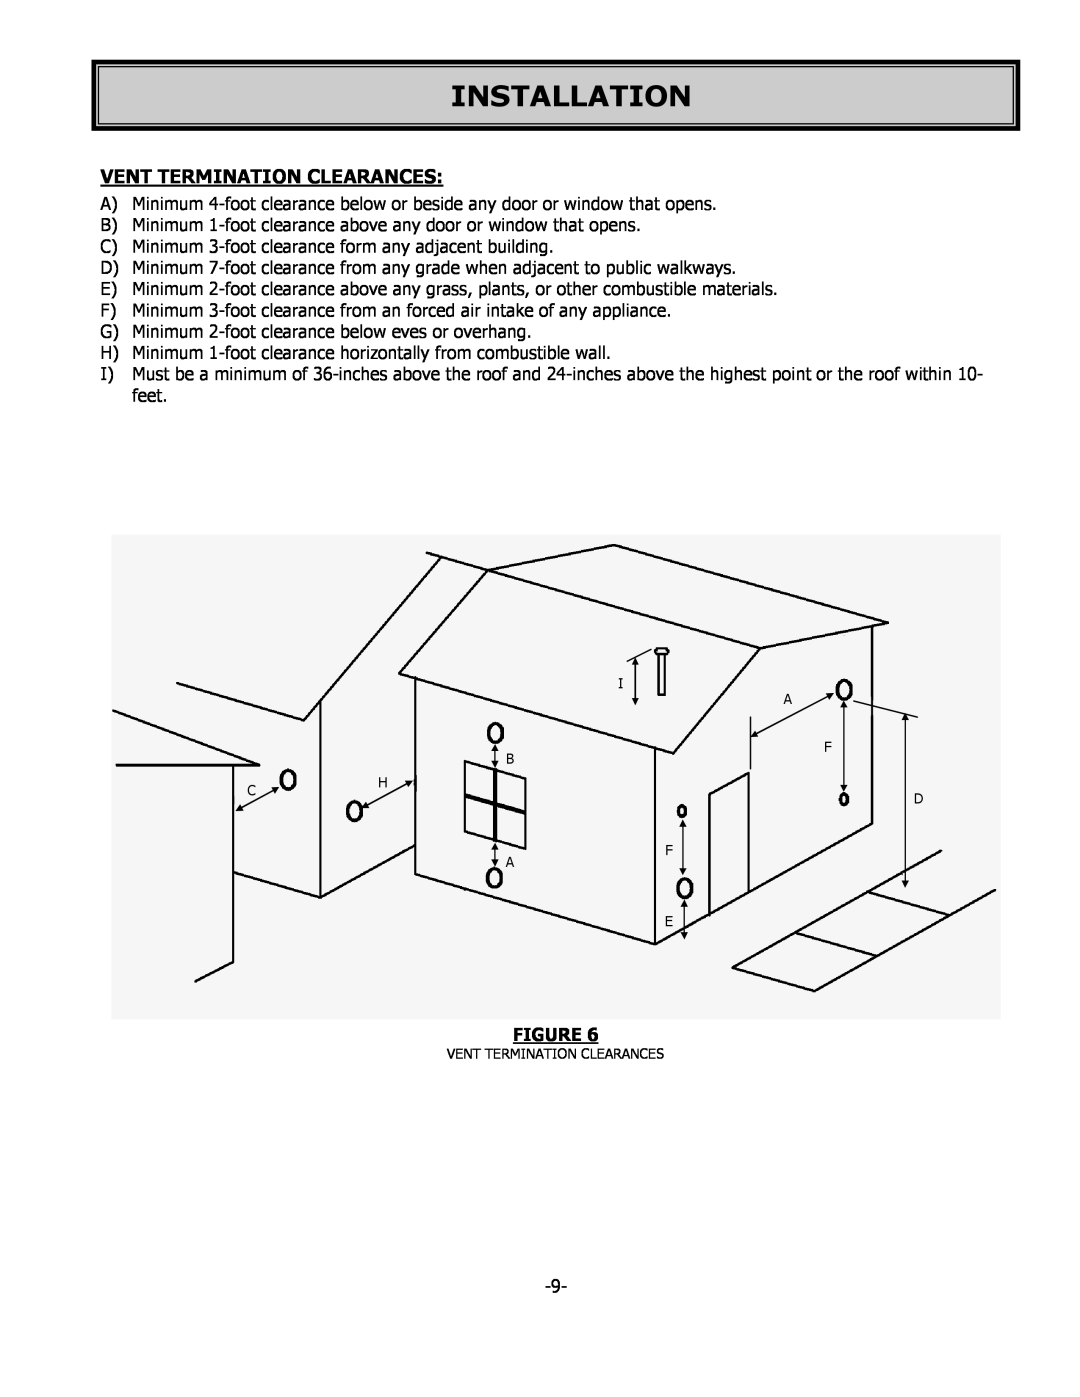 United States Stove 5700 owner manual Vent Termination Clearances, Installation 